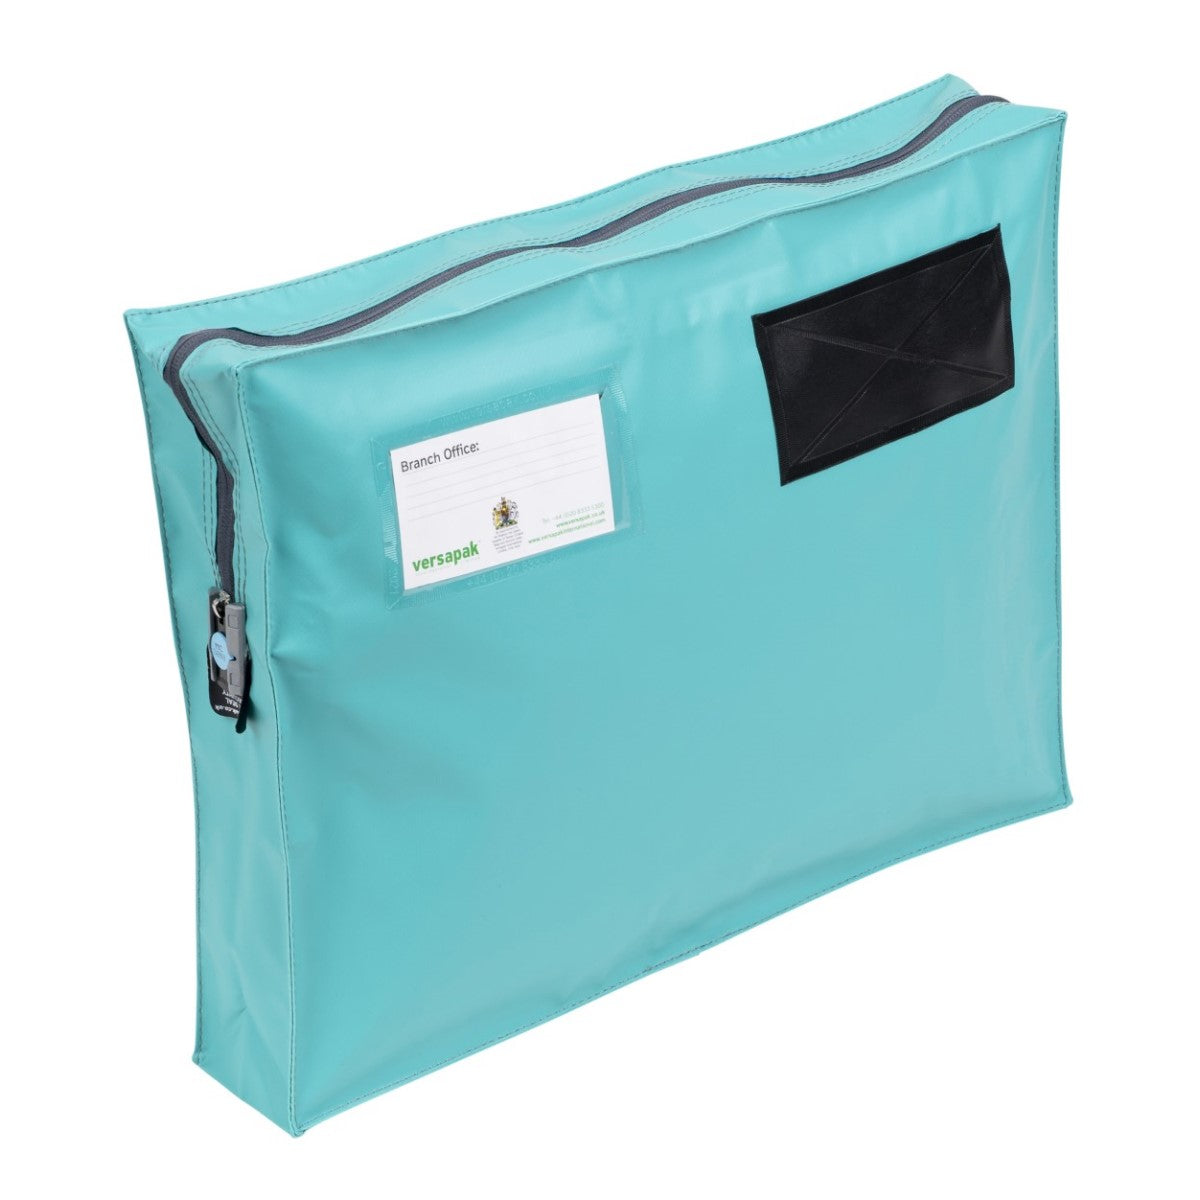 Versapak Mail Pouch with Gusset ZG3 Green Button